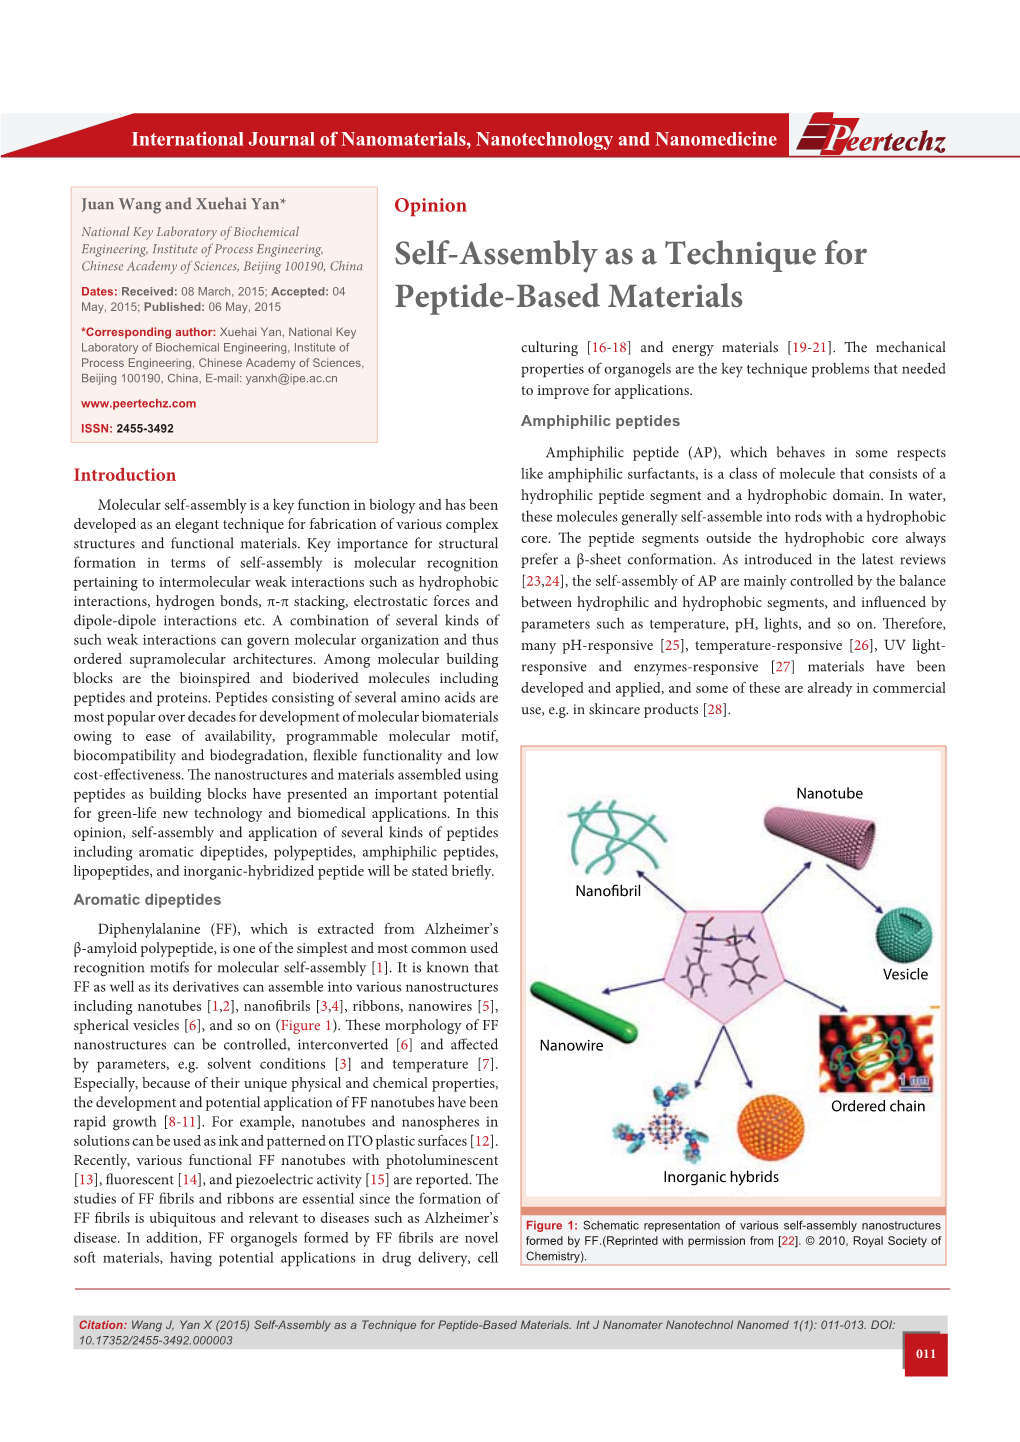 Self-Assembly As a Technique for Peptide-Based Materials